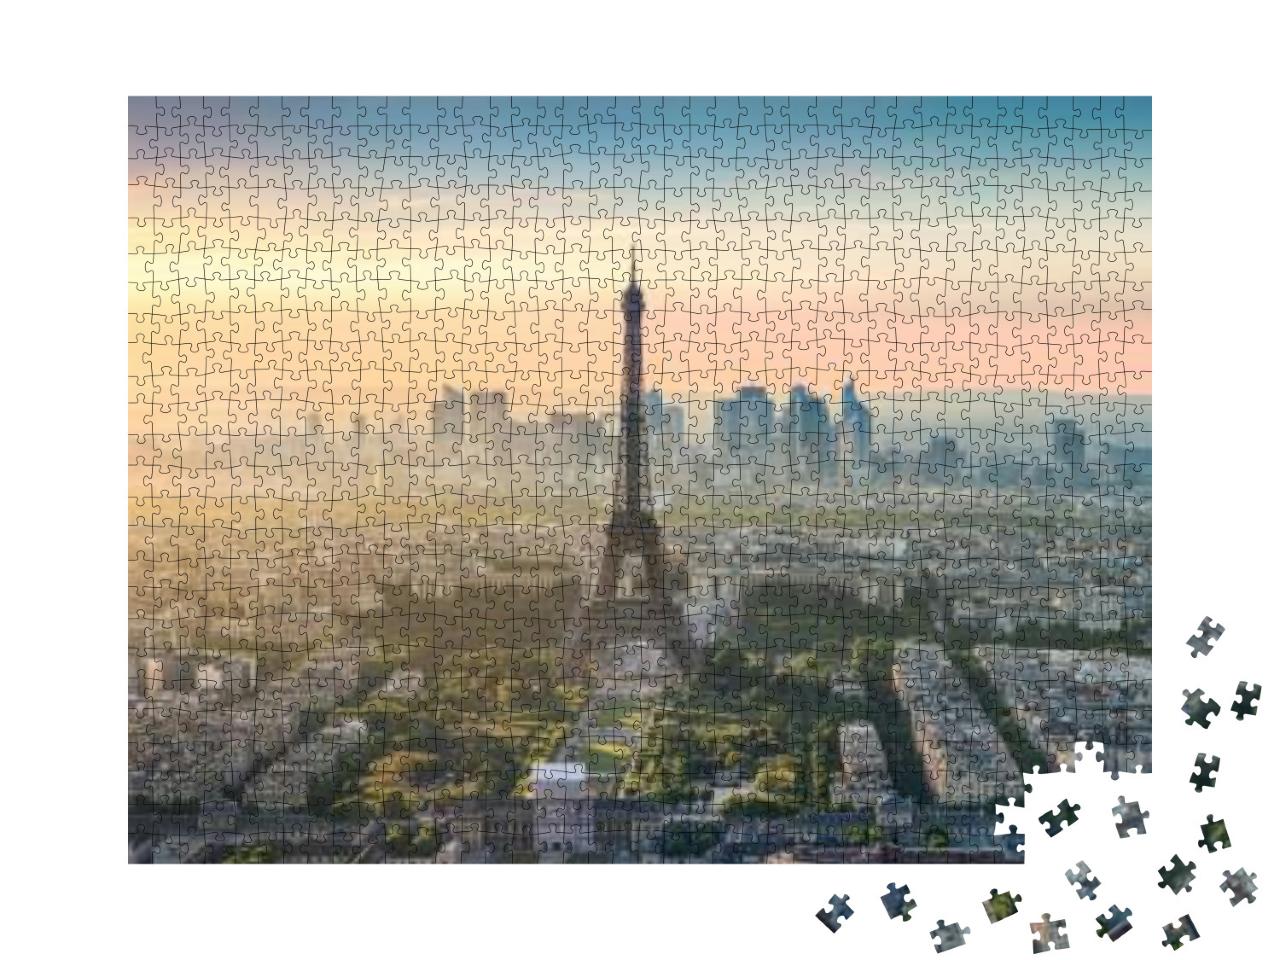 Aerial View of Paris with Eiffel Tower, France... Jigsaw Puzzle with 1000 pieces